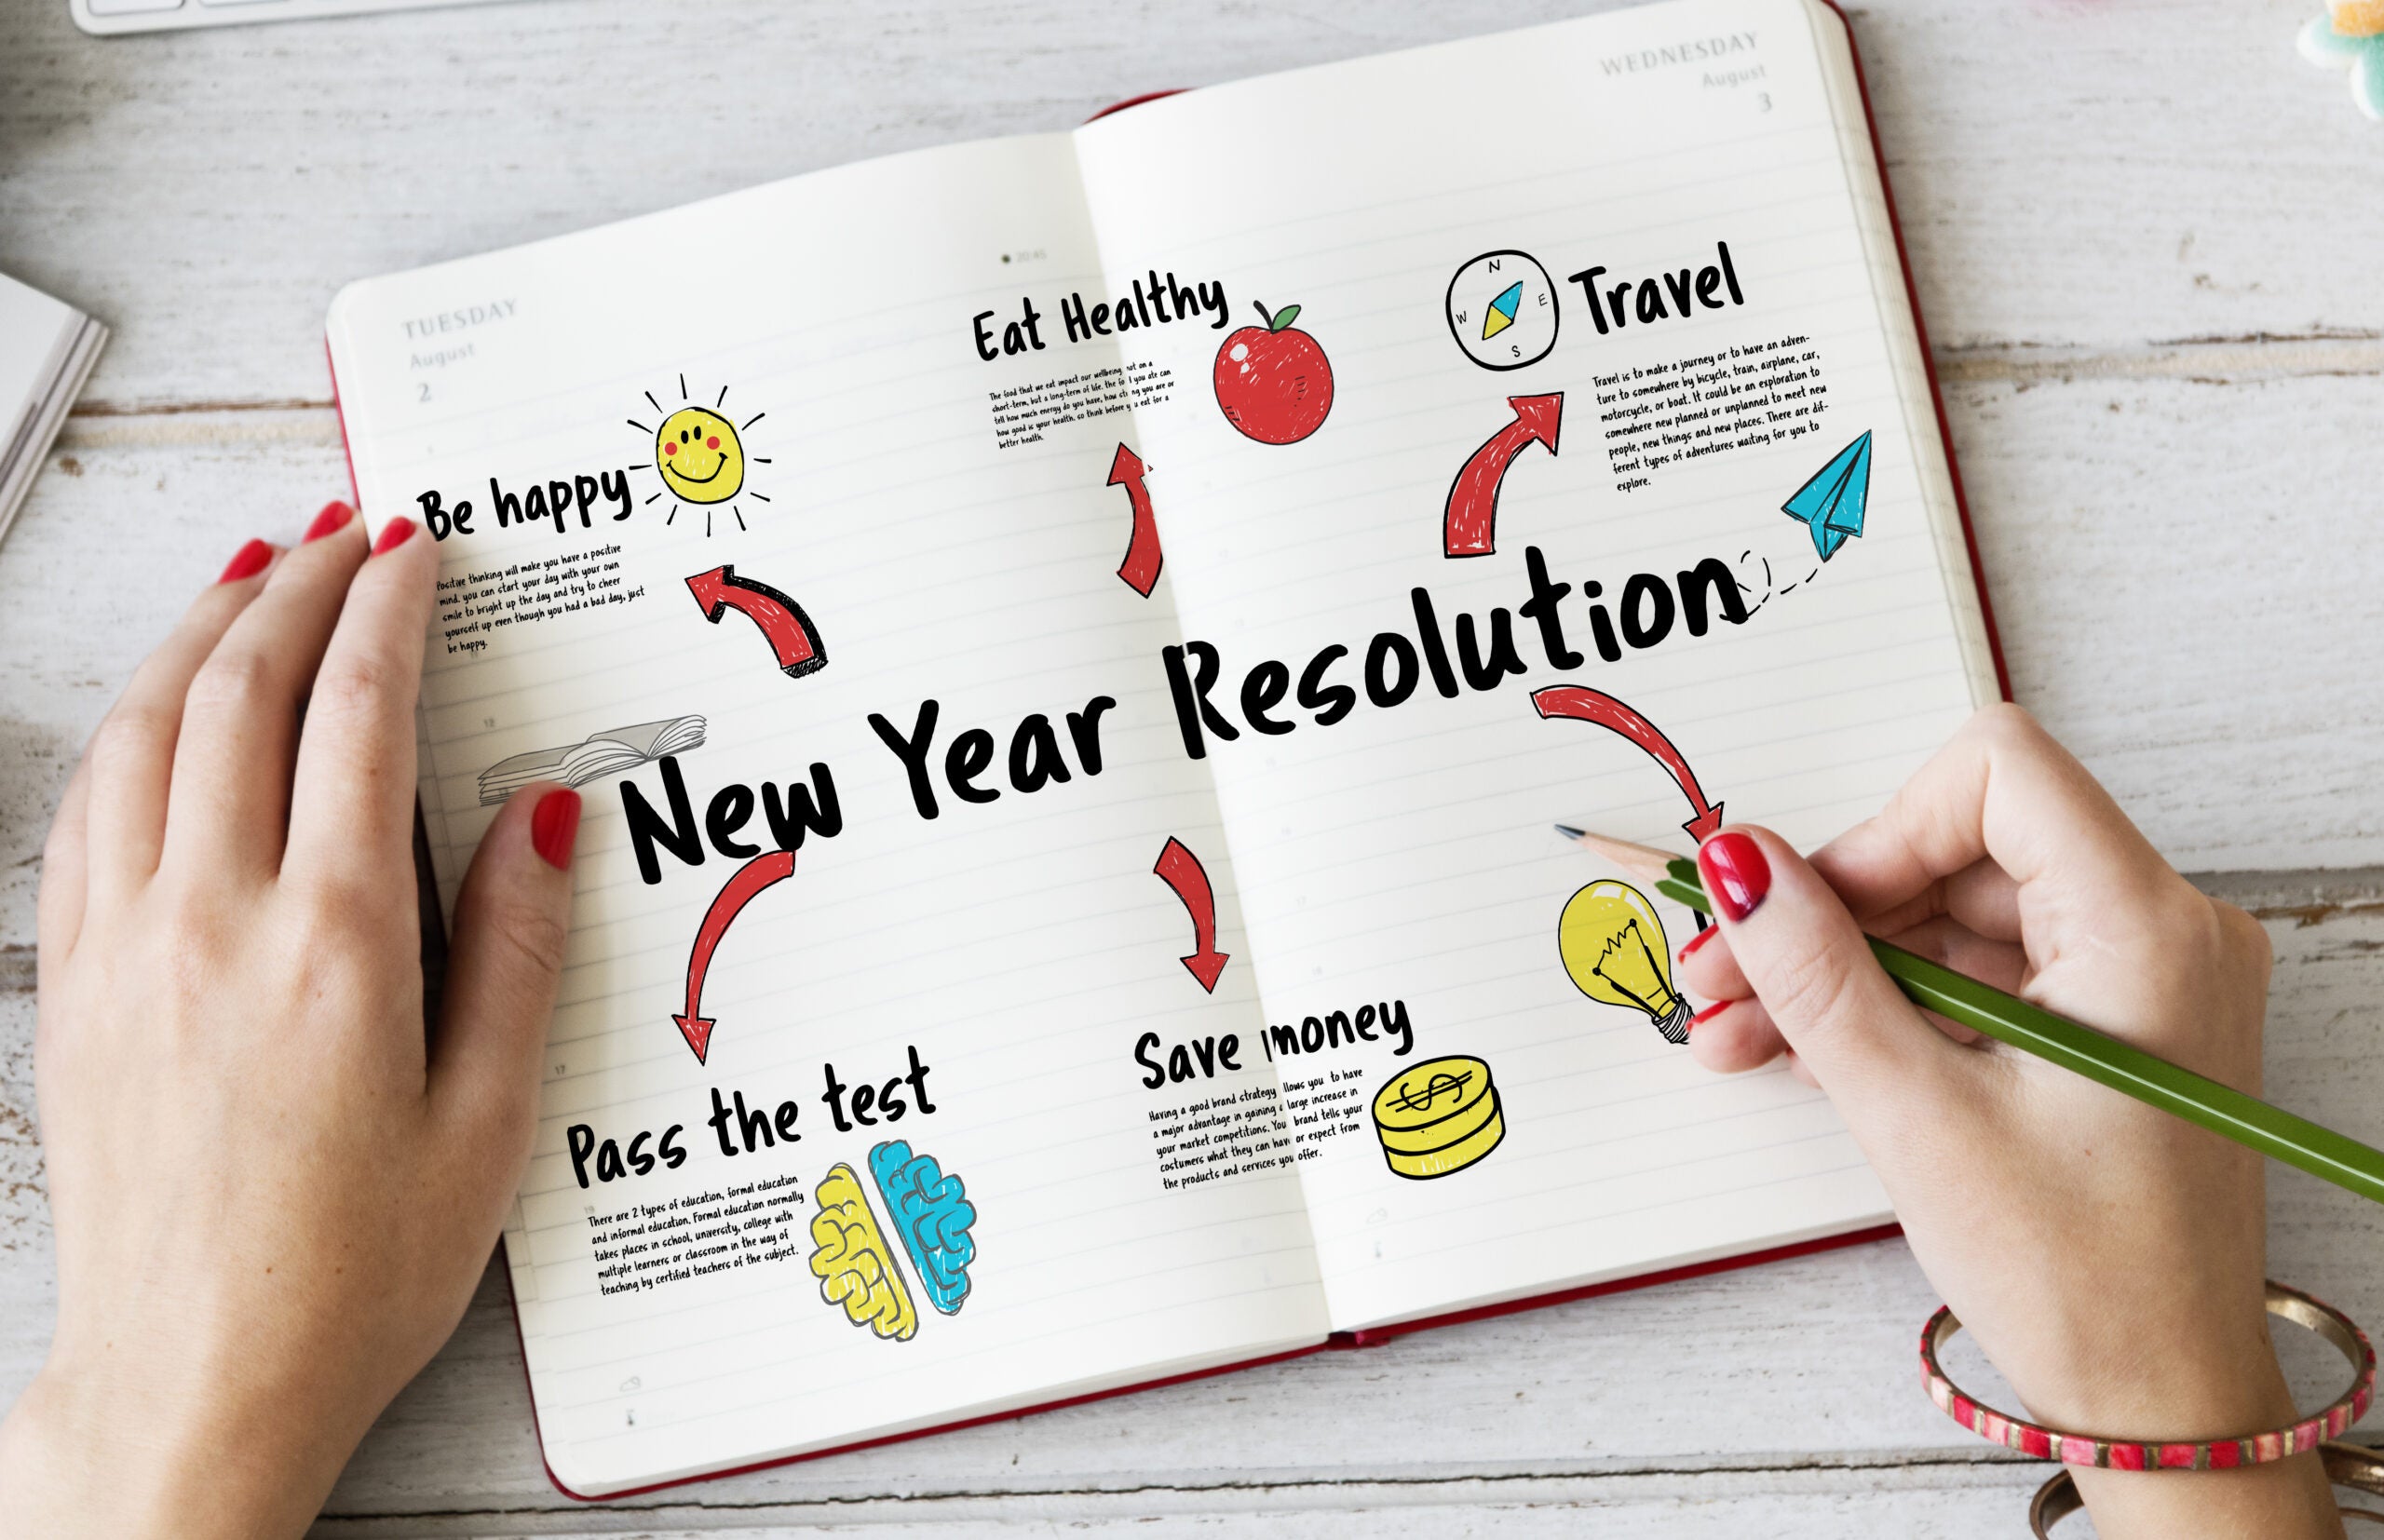 6 New Year’s resolution ideas and how credit cards can help achieve